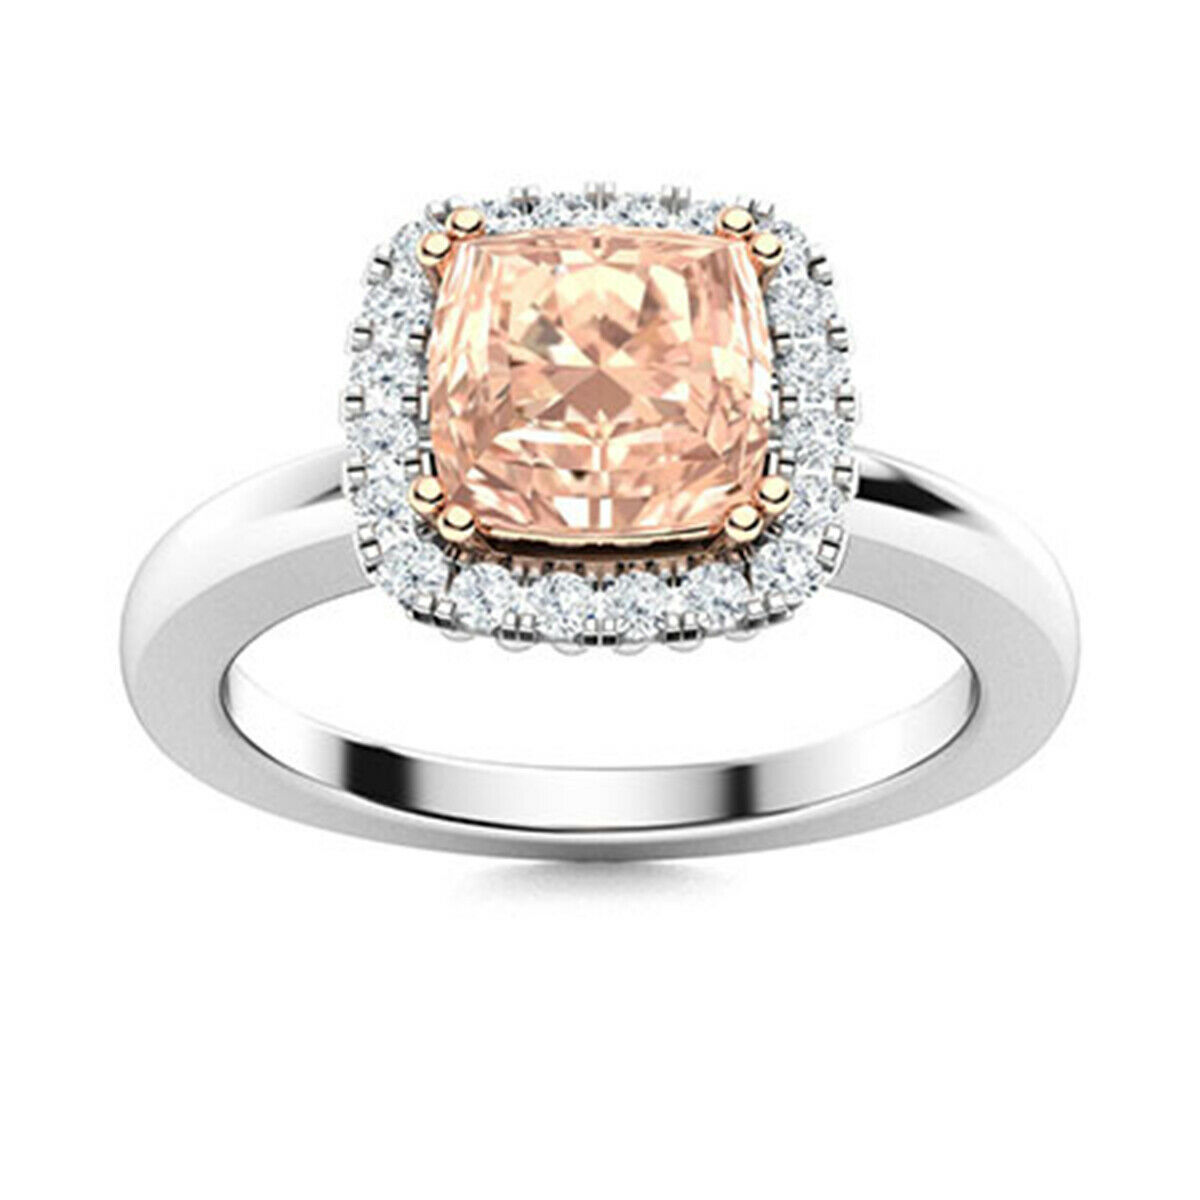 0.75 Ctw Cushion Halo Solitaire Accents Morganite Ring 10K White Gold